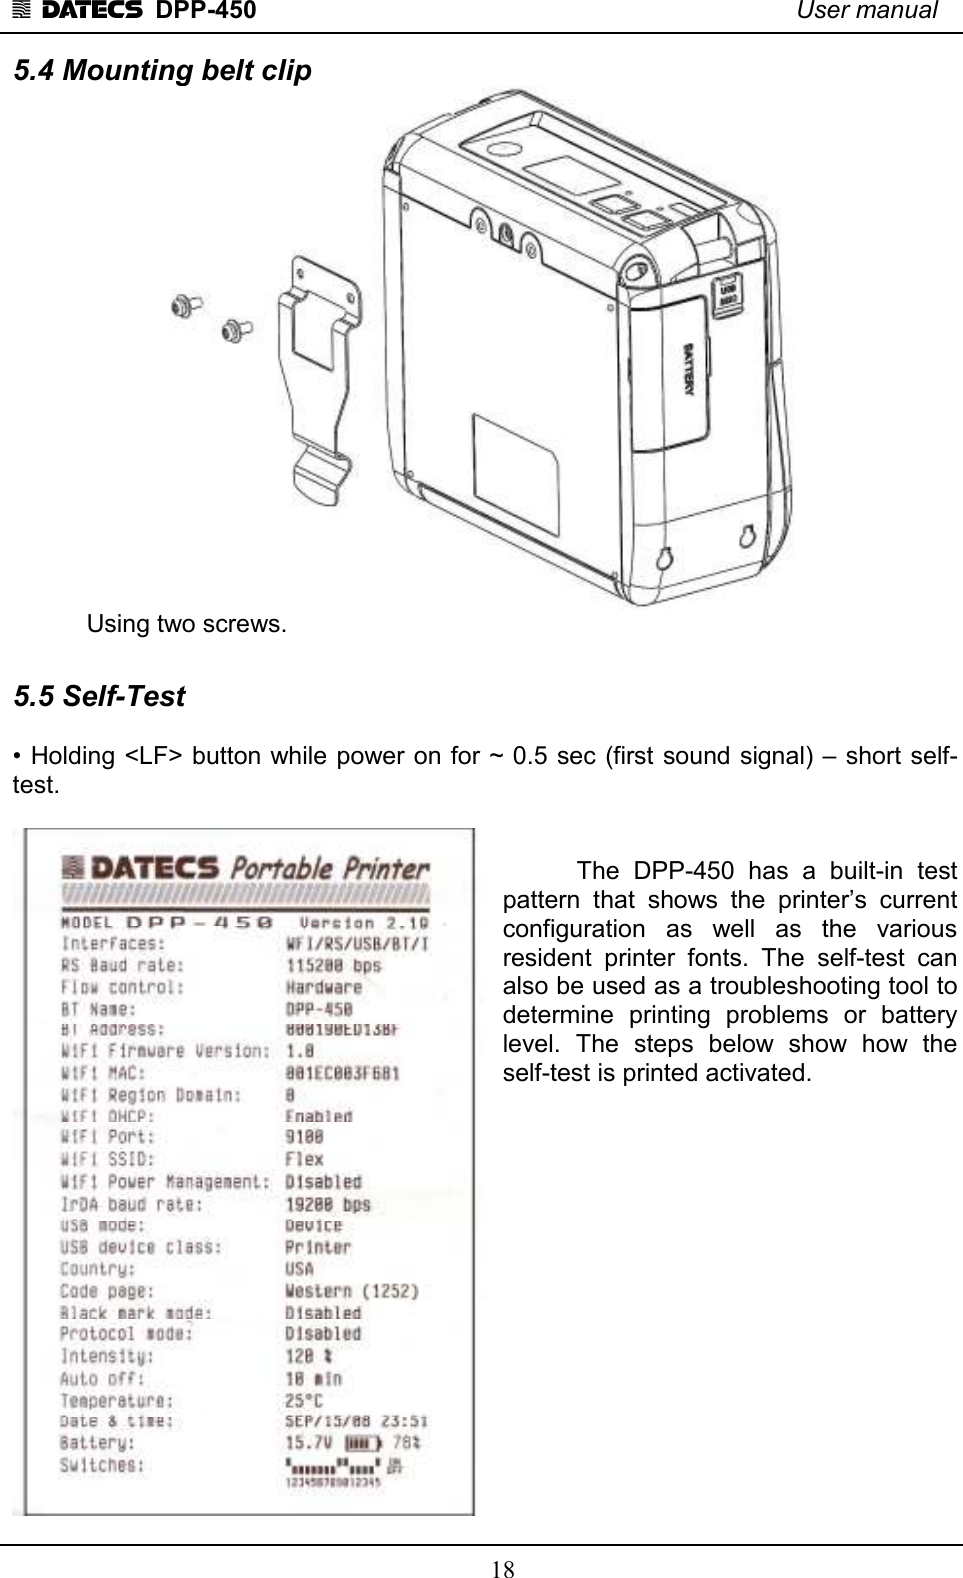 1 DATECS  DPP-450    User manual     18 5.4 Mounting belt clip    Using two screws.  5.5 Self-Test  • Holding &lt;LF&gt; button while power on for ~ 0.5 sec (first sound signal) – short self-test.     The  DPP-450  has  a  built-in  test pattern  that  shows  the  printer’s  current configuration  as  well  as  the  various resident  printer  fonts.  The  self-test  can also be used as a troubleshooting tool to determine  printing  problems  or  battery level.  The  steps  below  show  how  the self-test is printed activated.                